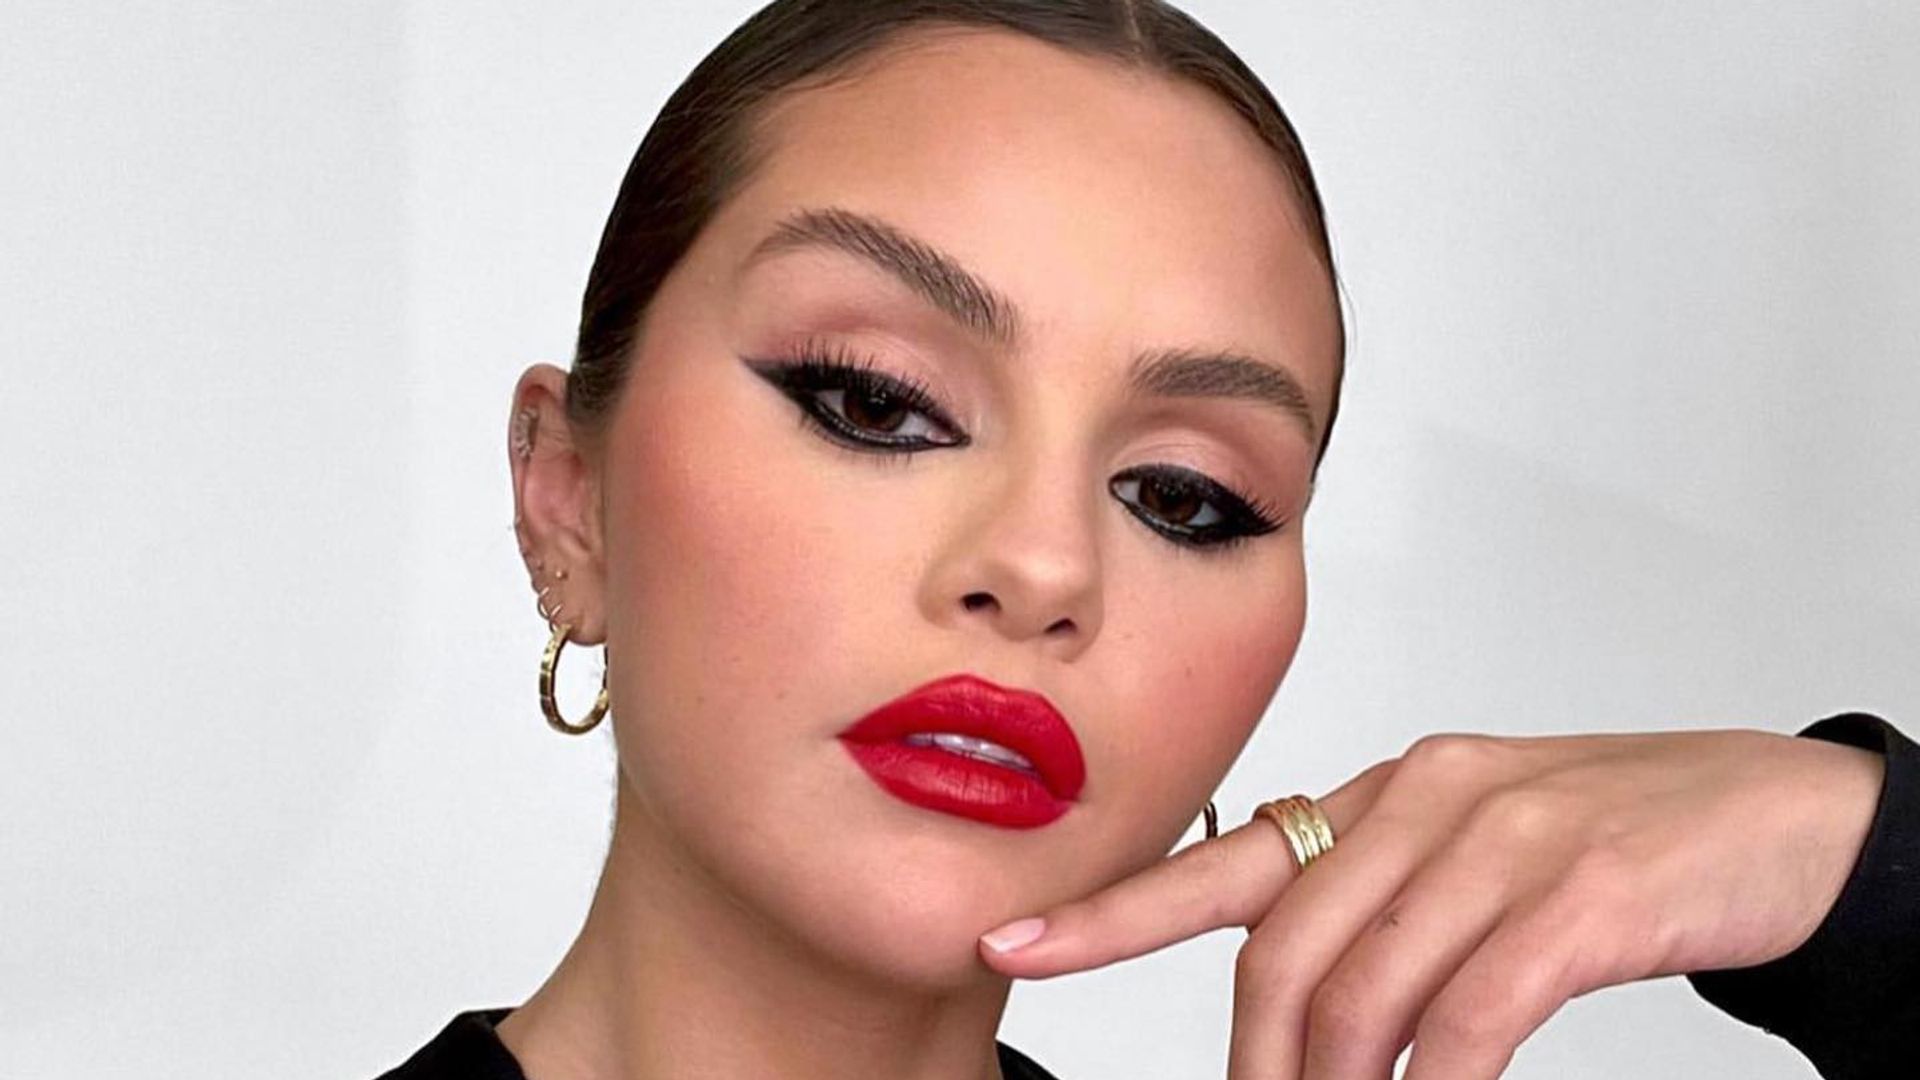 Selena Gomez poses in a full glam make up look on her Instagram